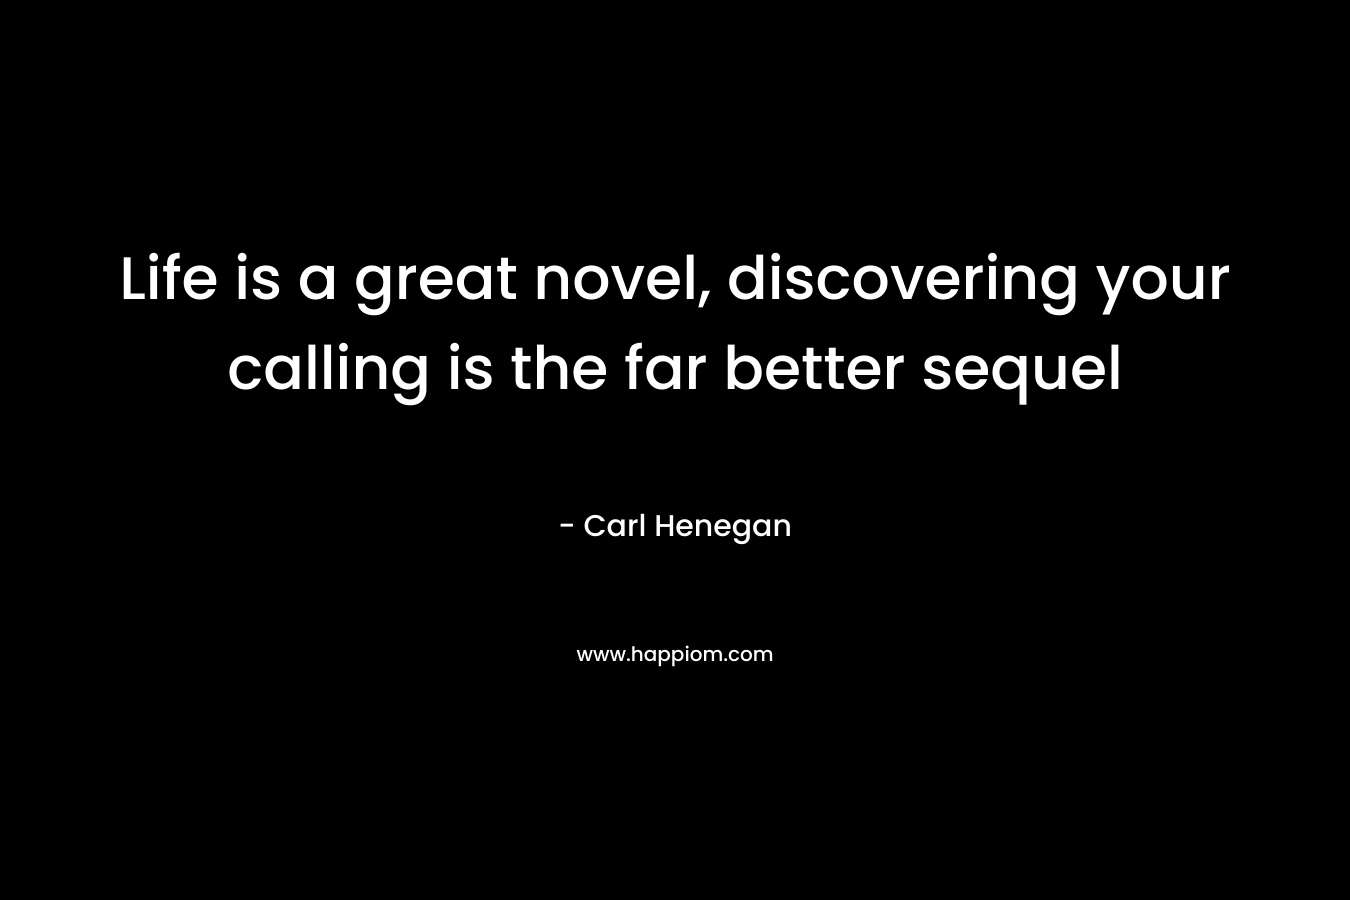 Life is a great novel, discovering your calling is the far better sequel